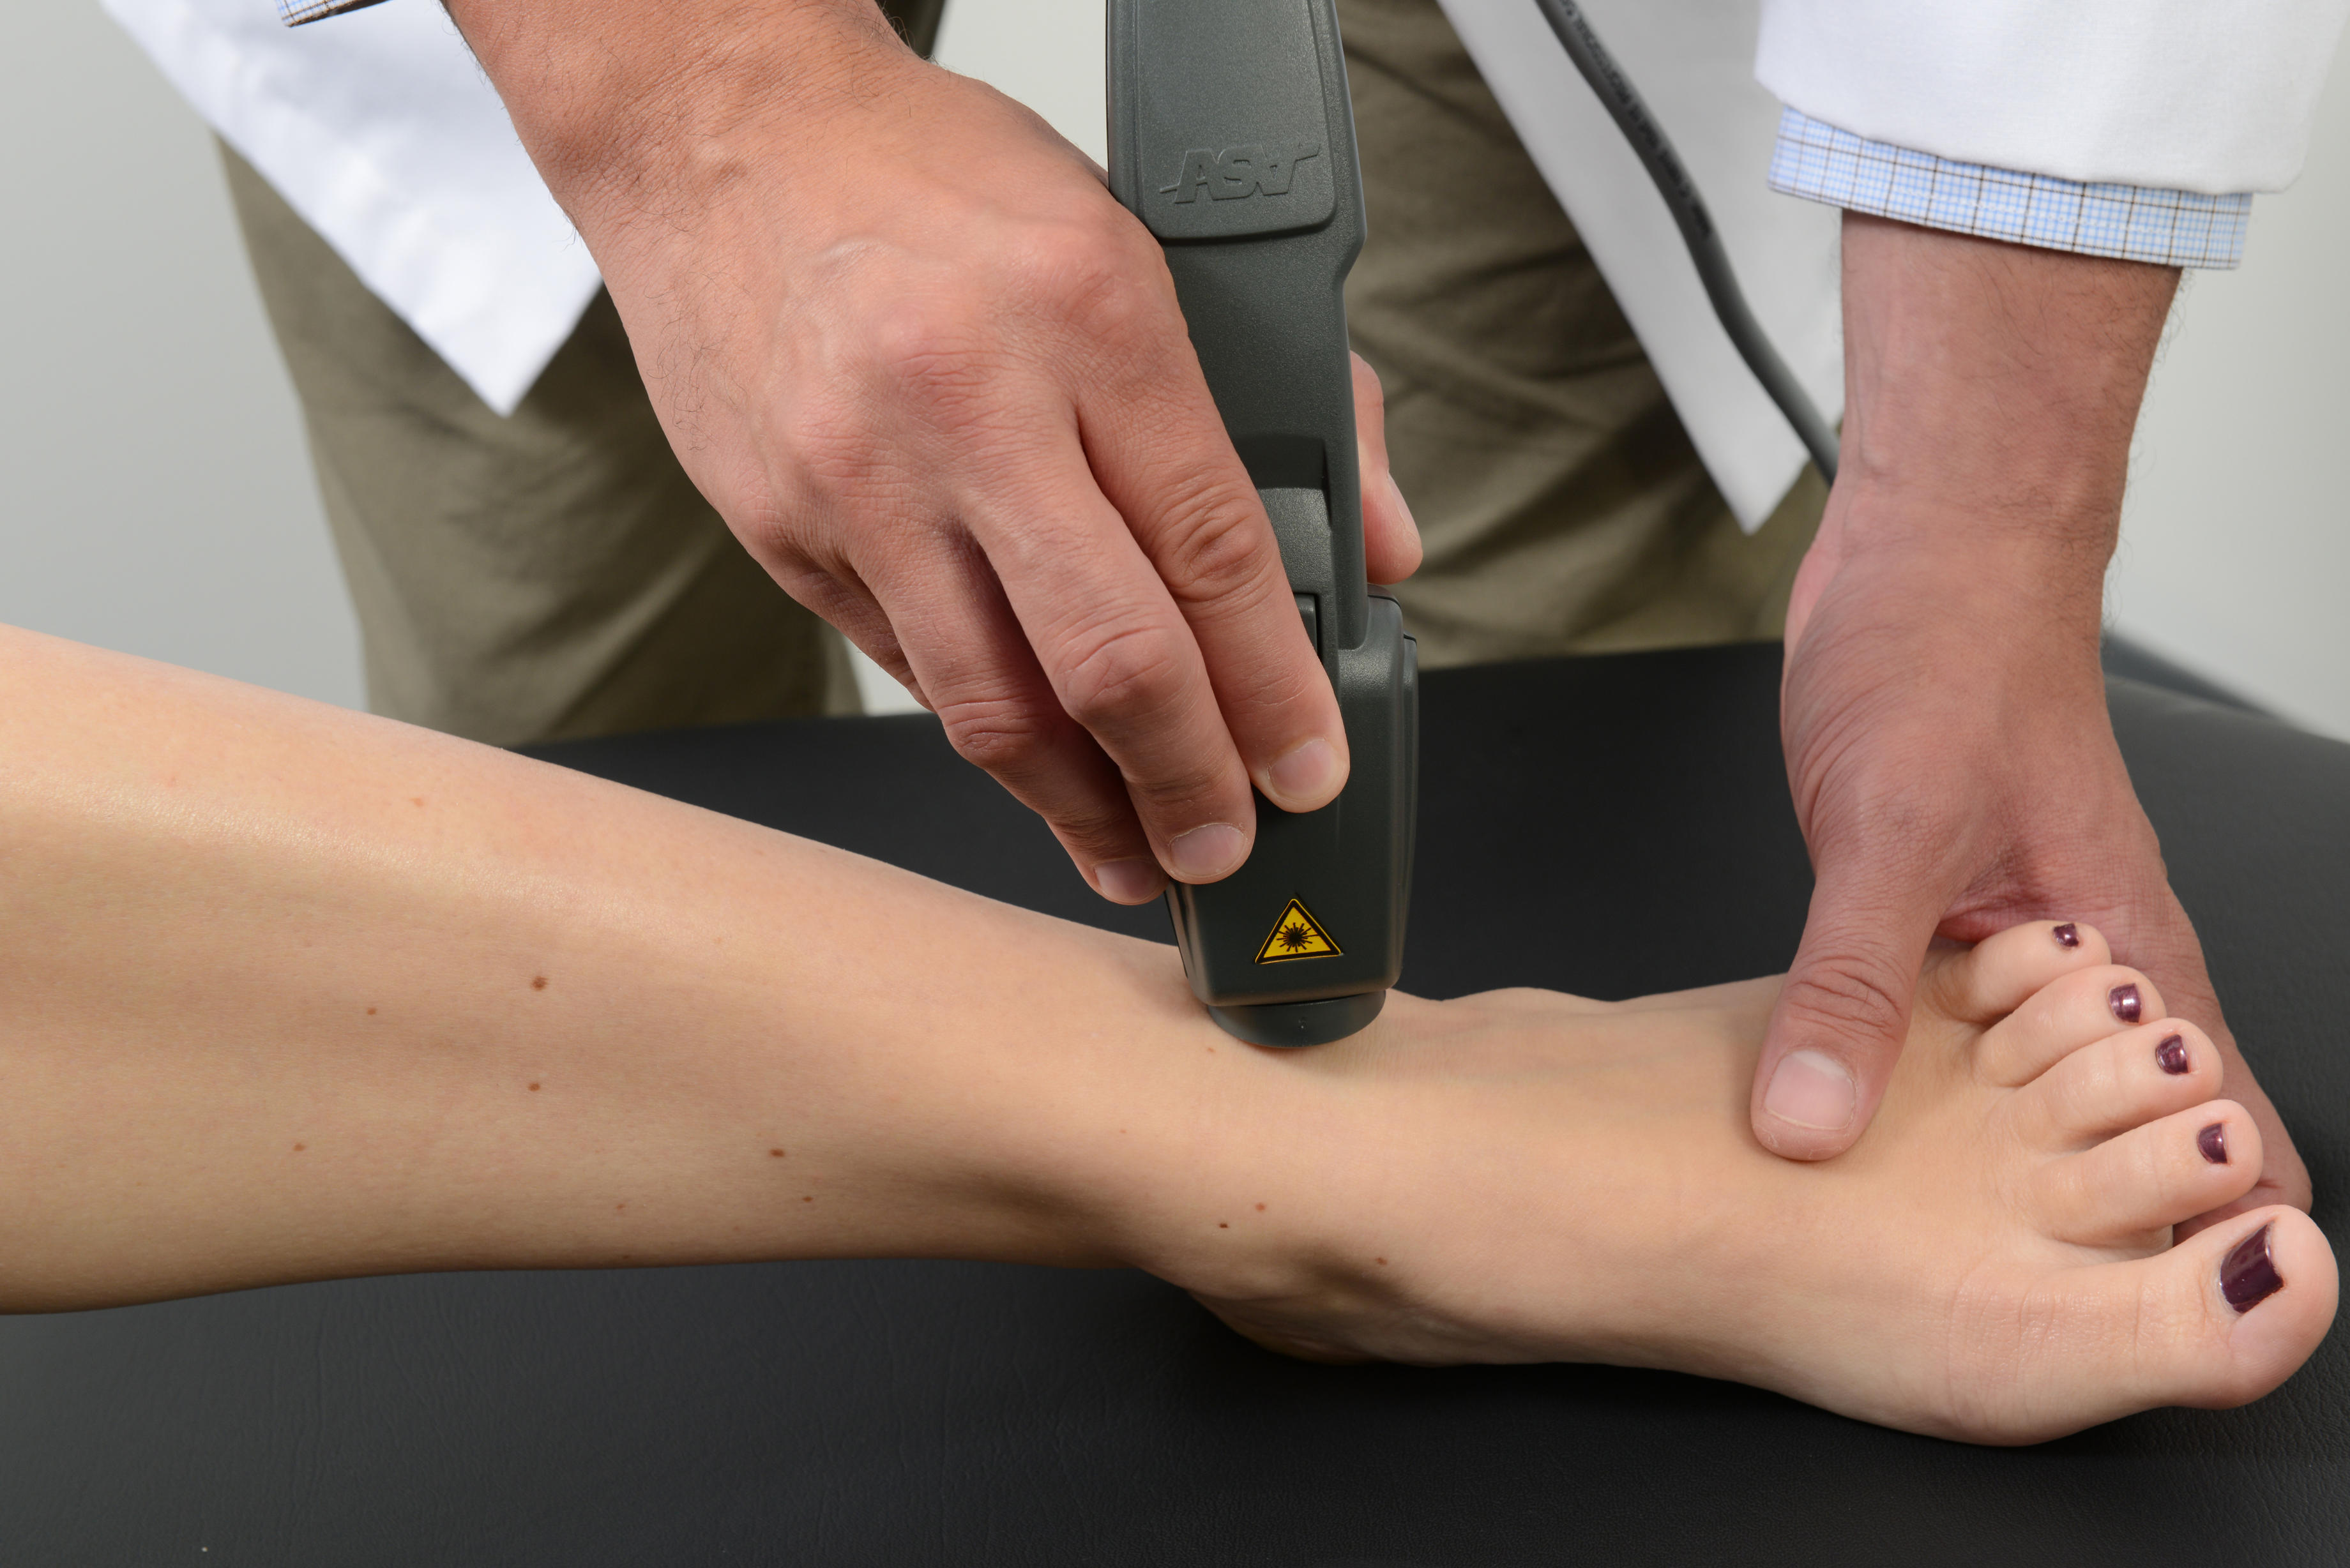 Get directions, reviews and information for Laurel Podiatry Associates in M...